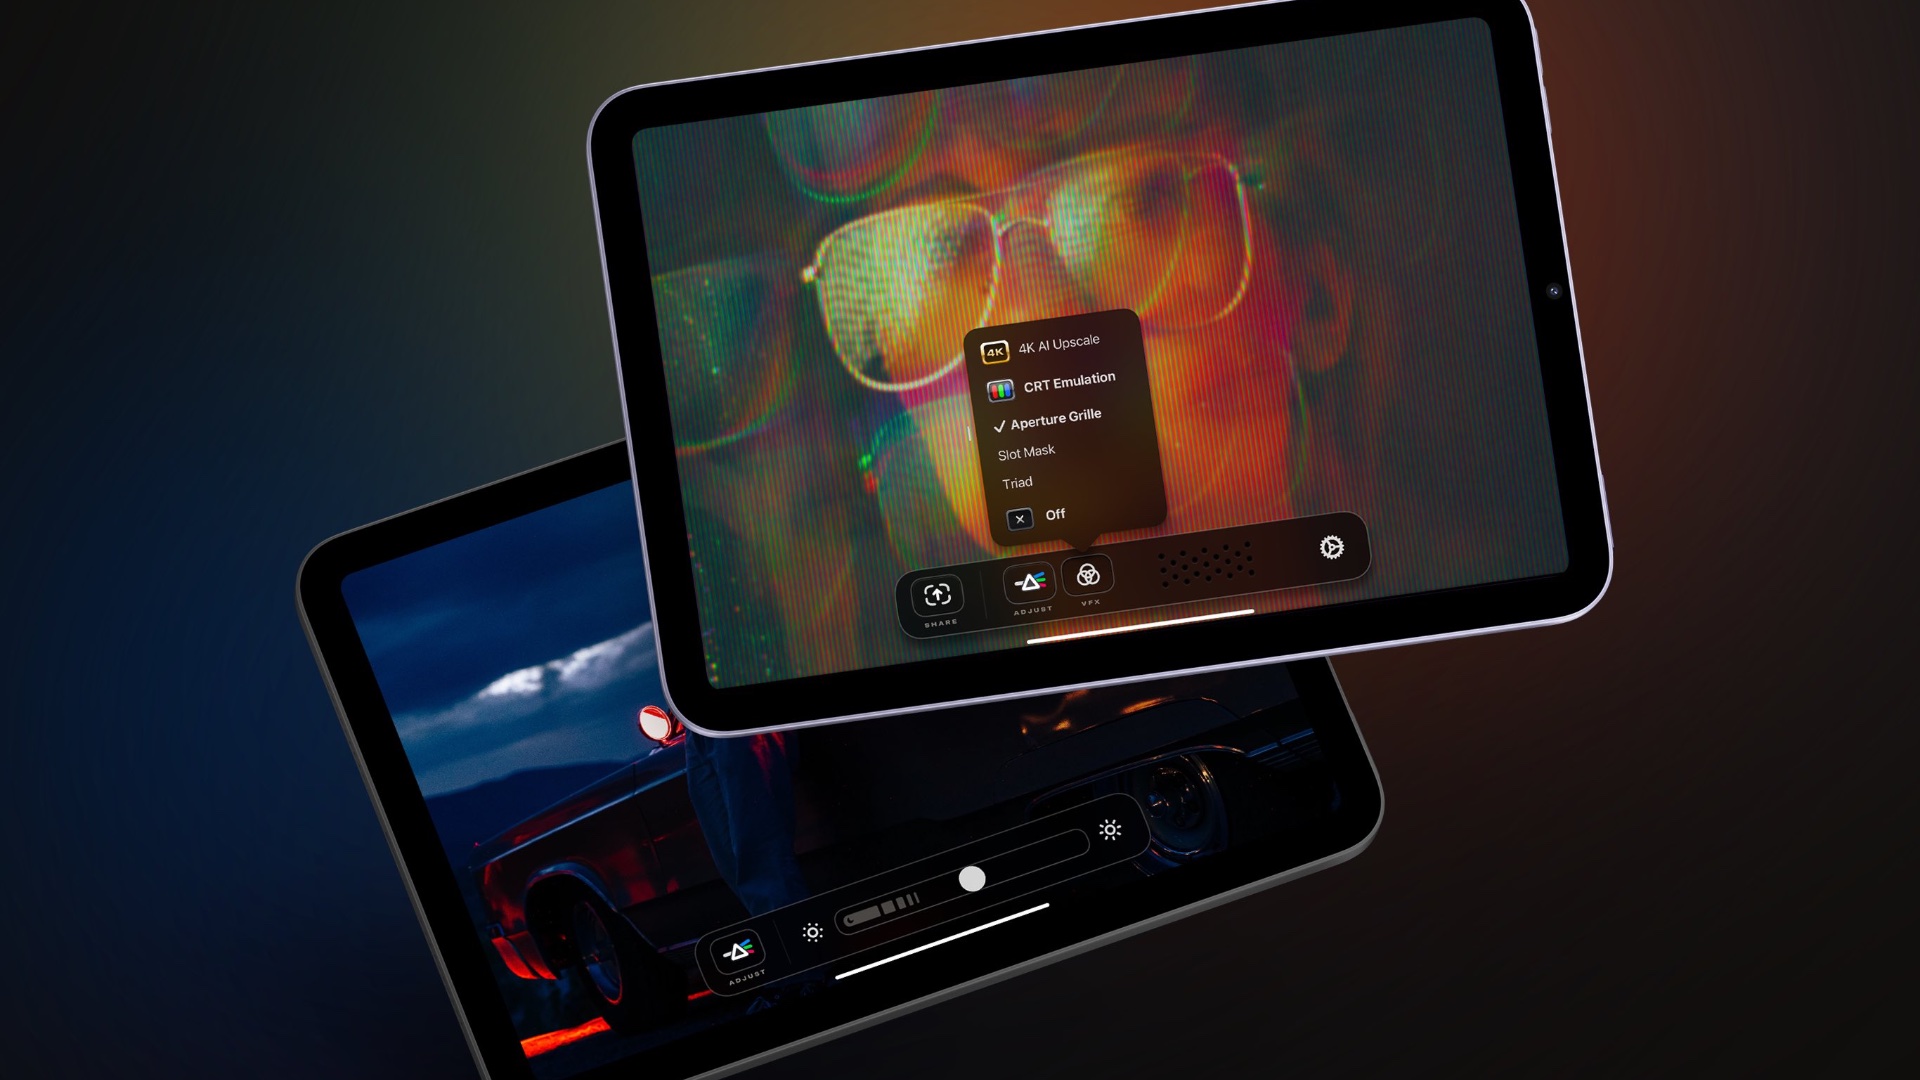 This app turns your iPad into an HDMI monitor and it's free